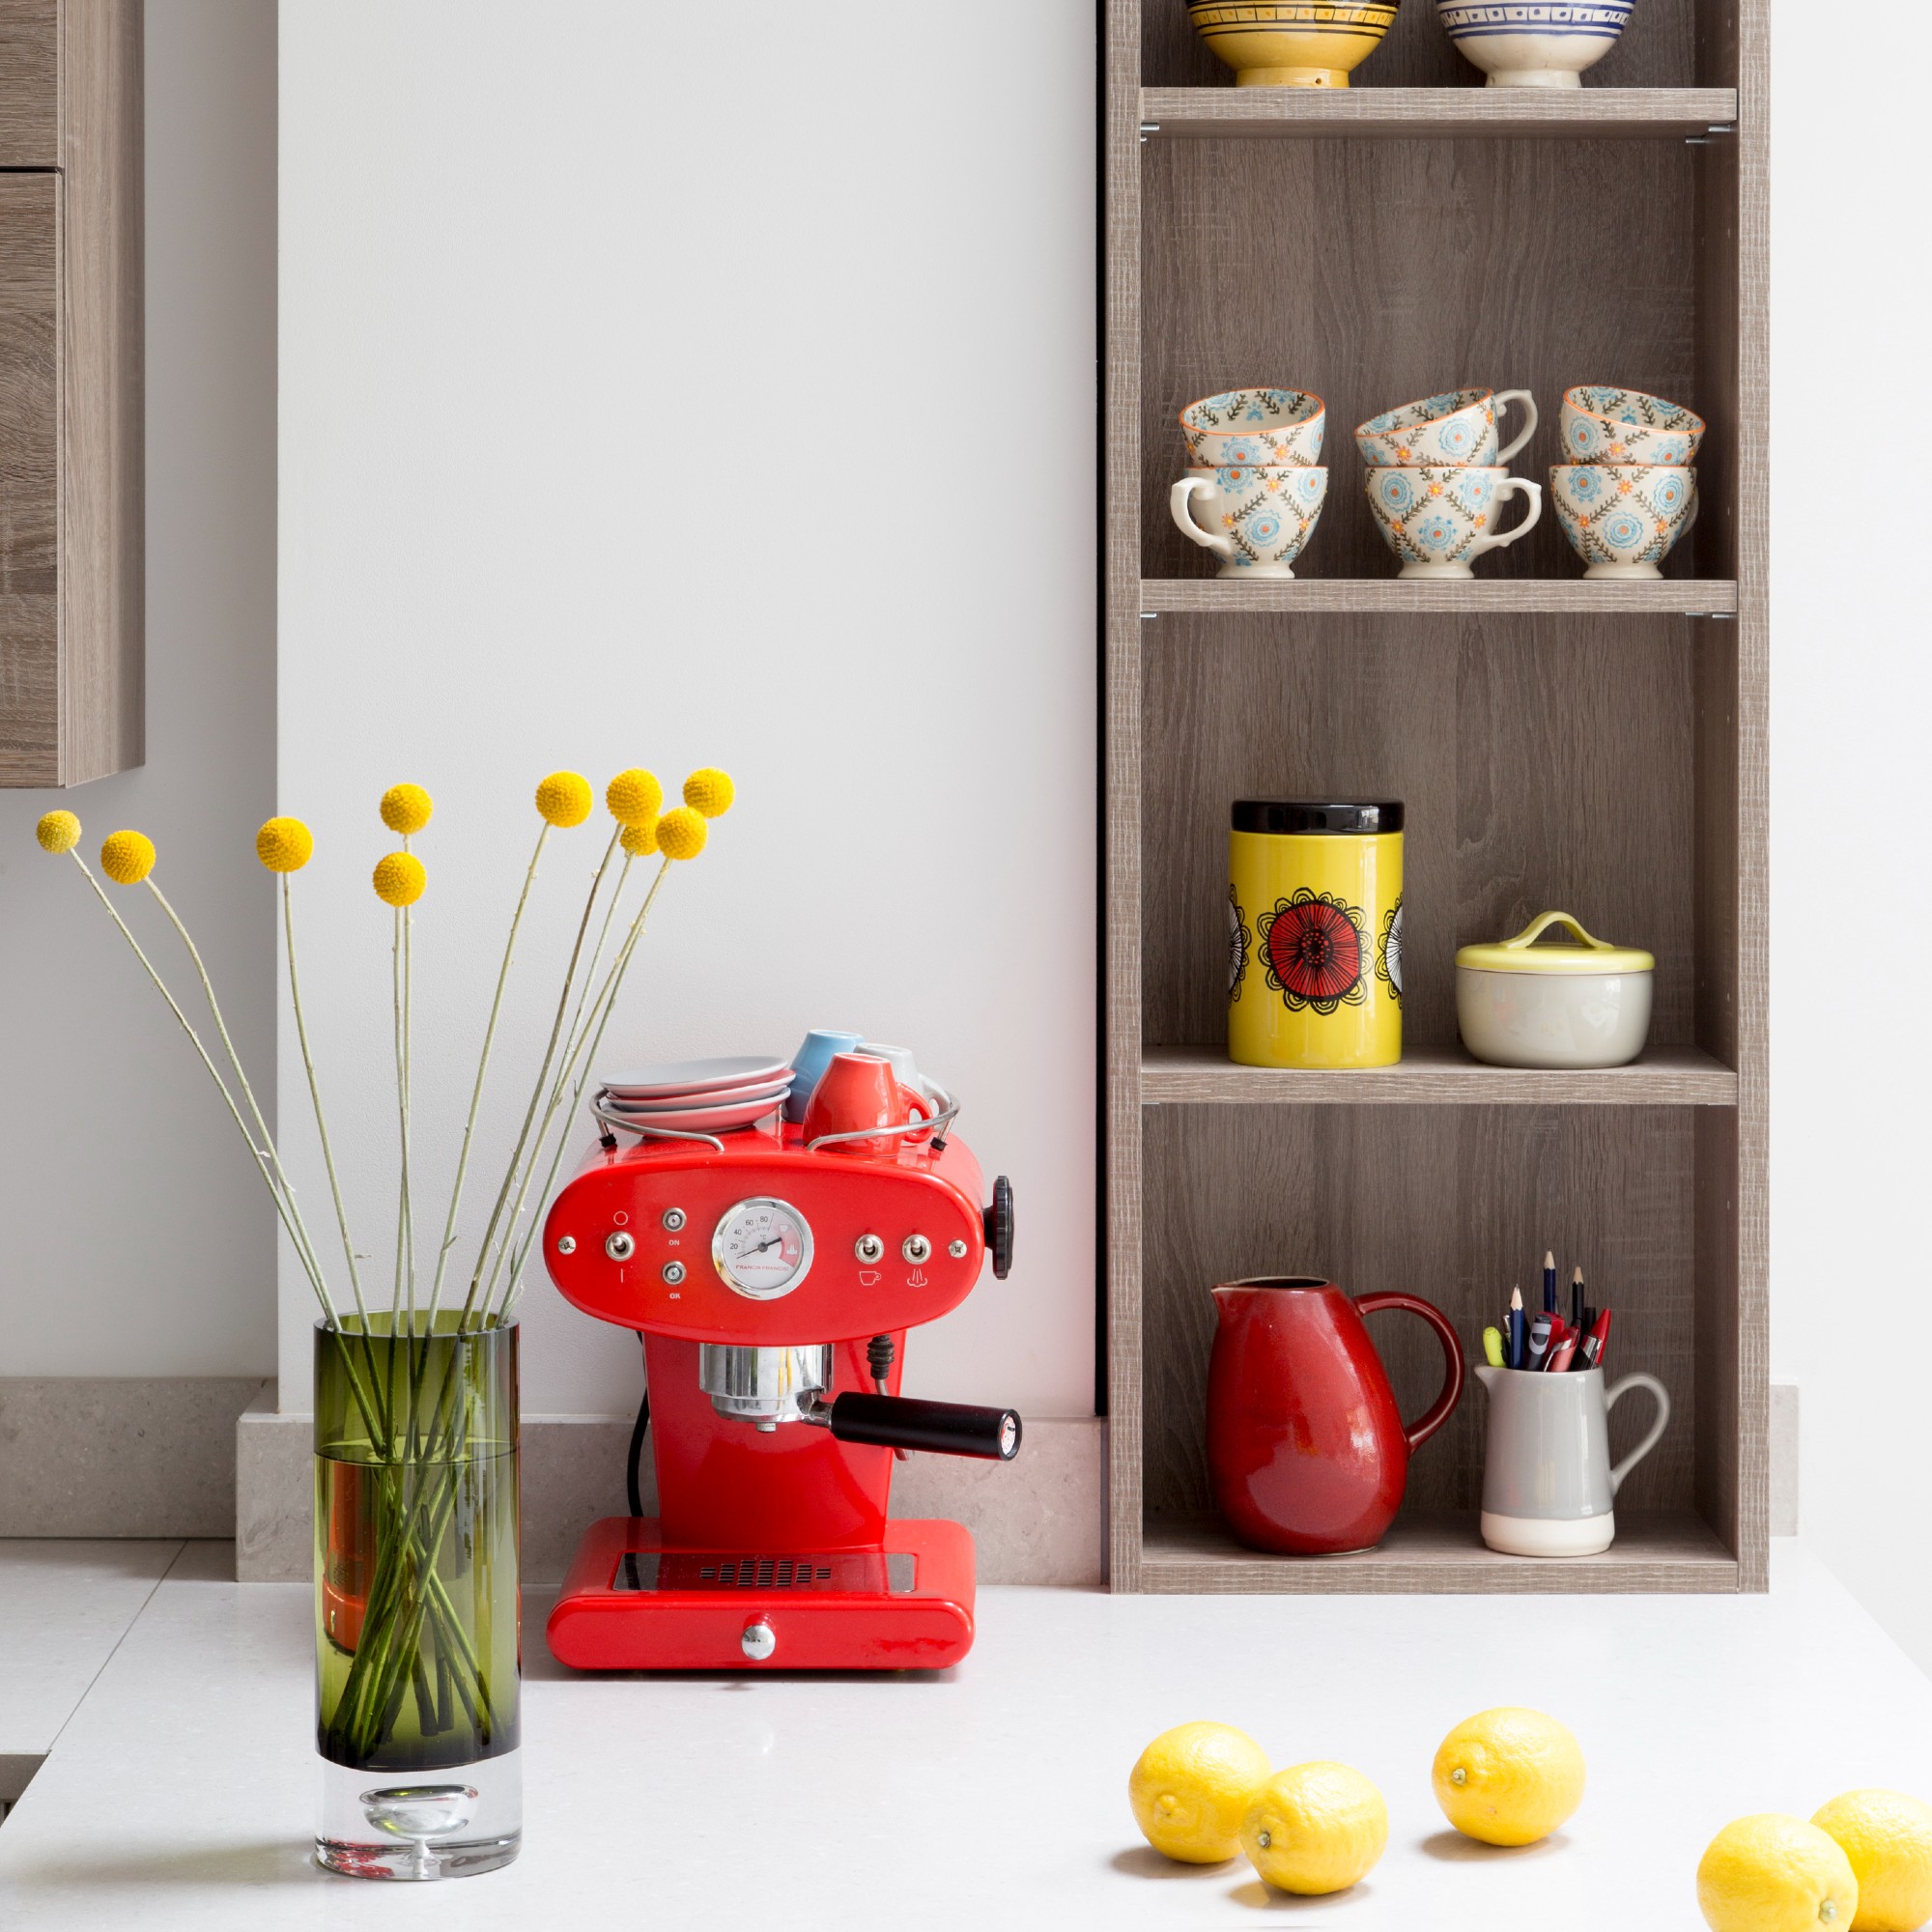 A kitchen worktop with a red coffee machine